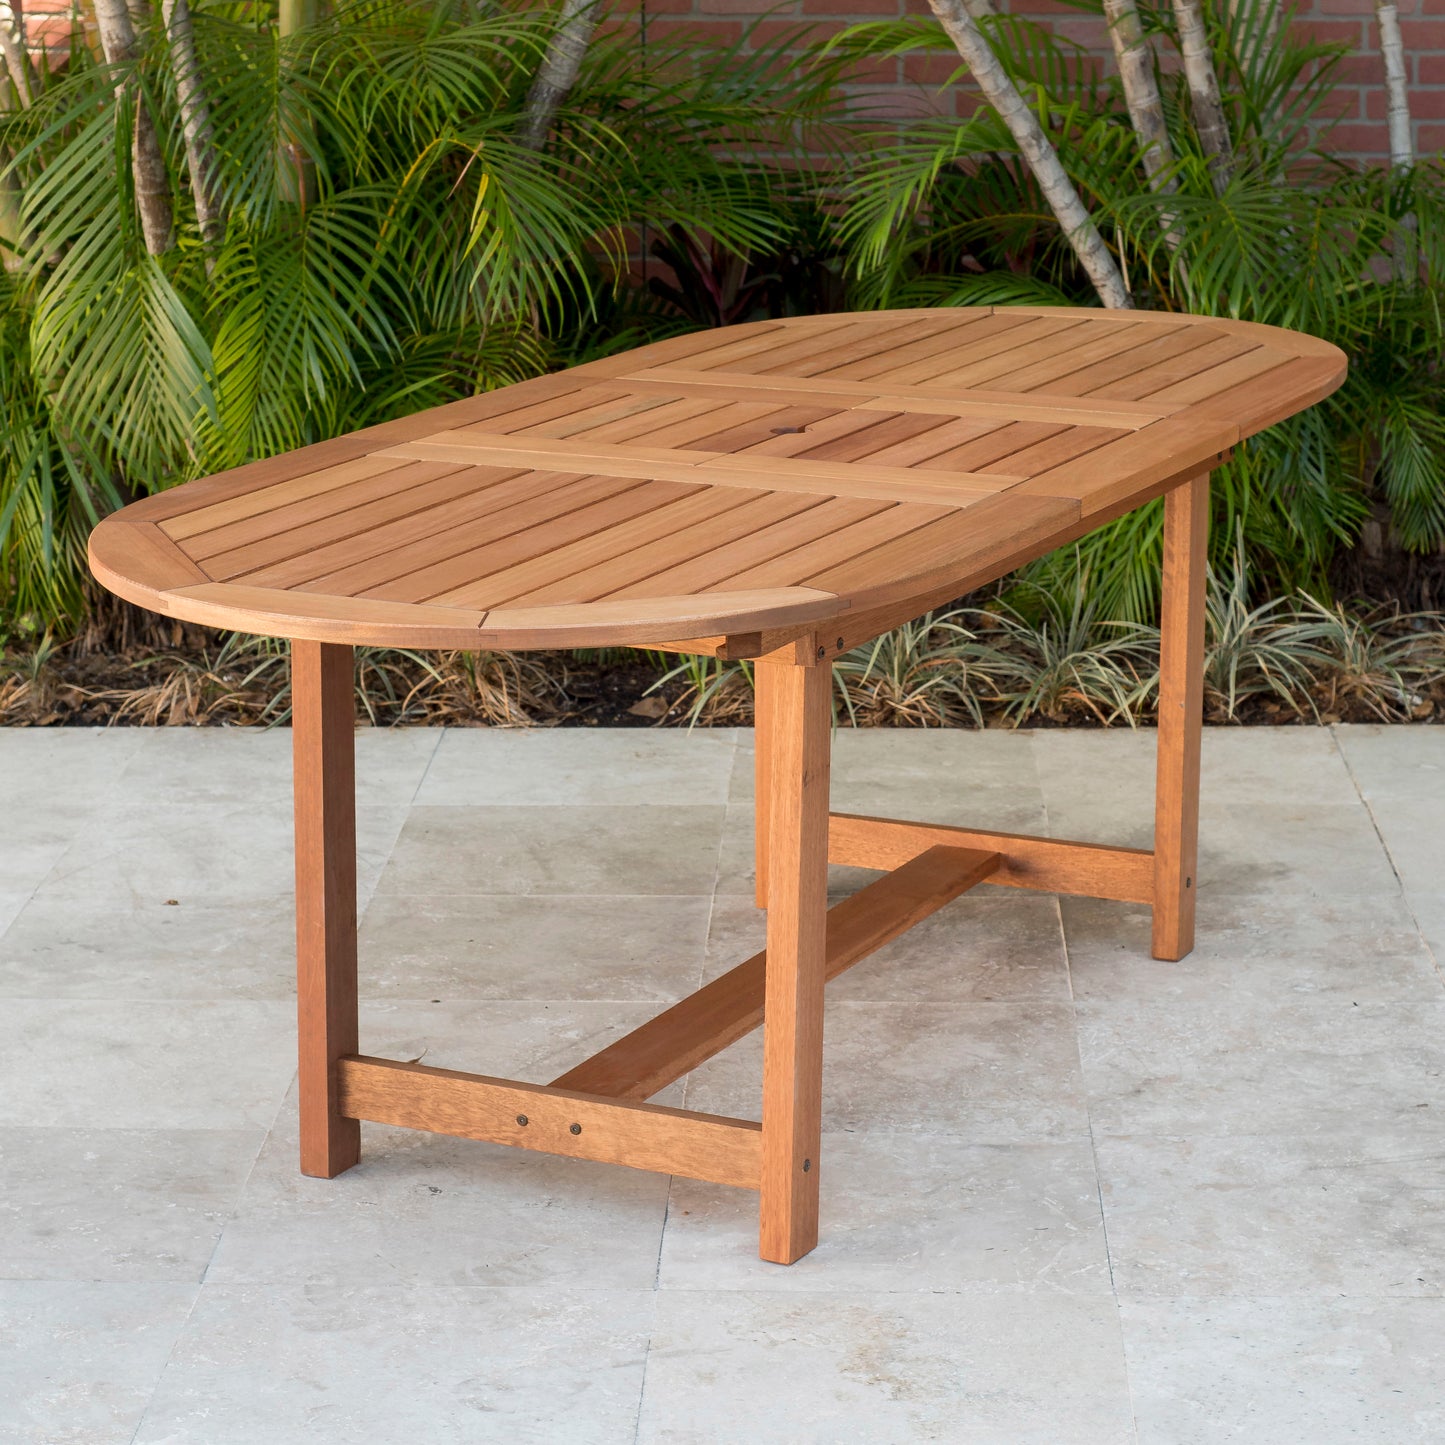 Milano 100% Solid Hardwood Extendable Rectangular Dining Table